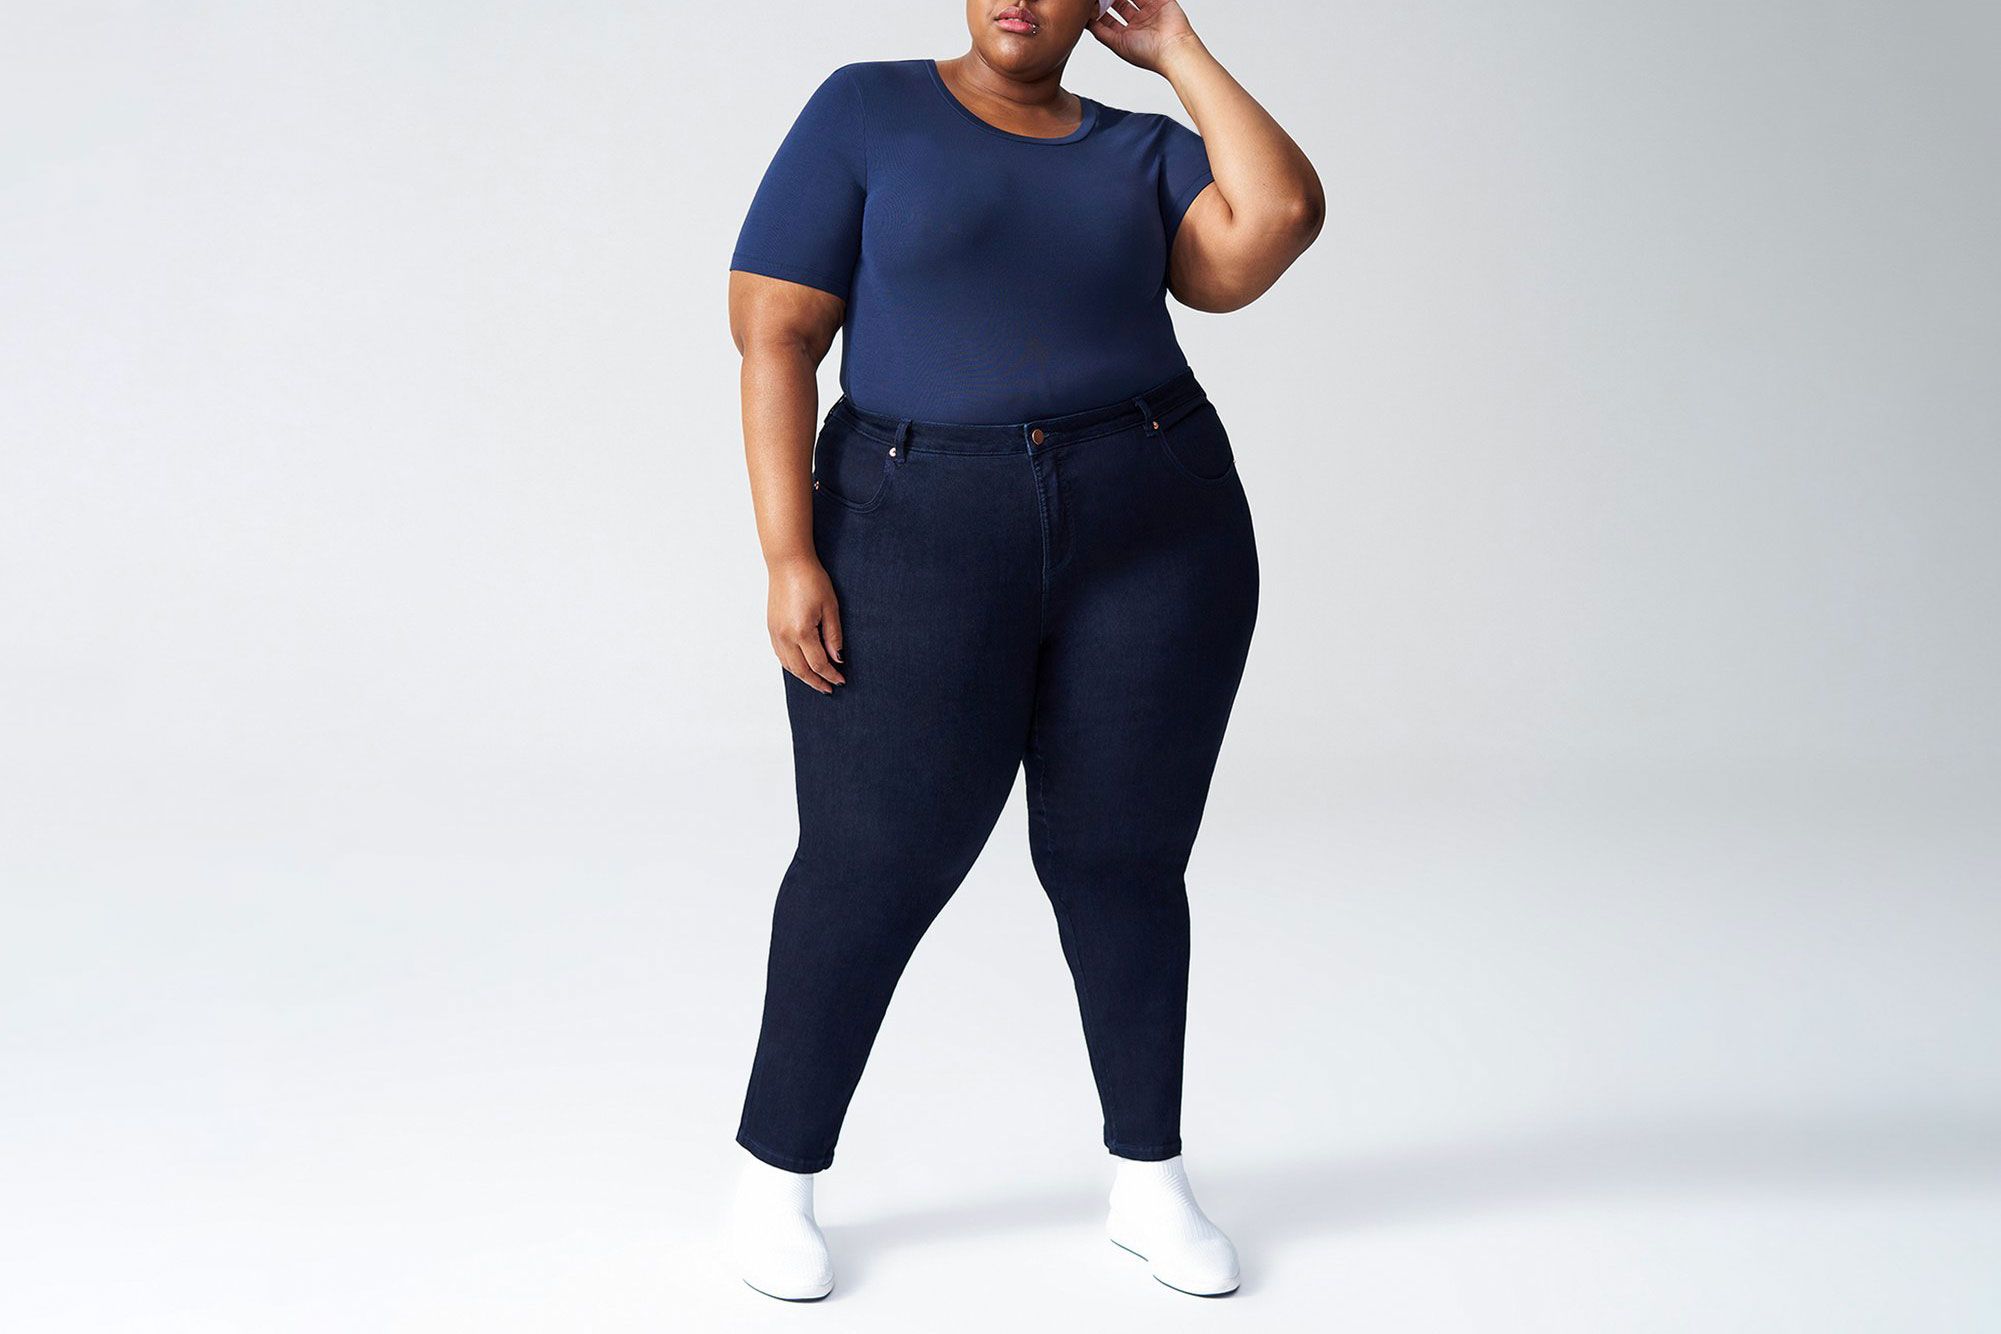 Universal Standard's e-commerce models now come in every size